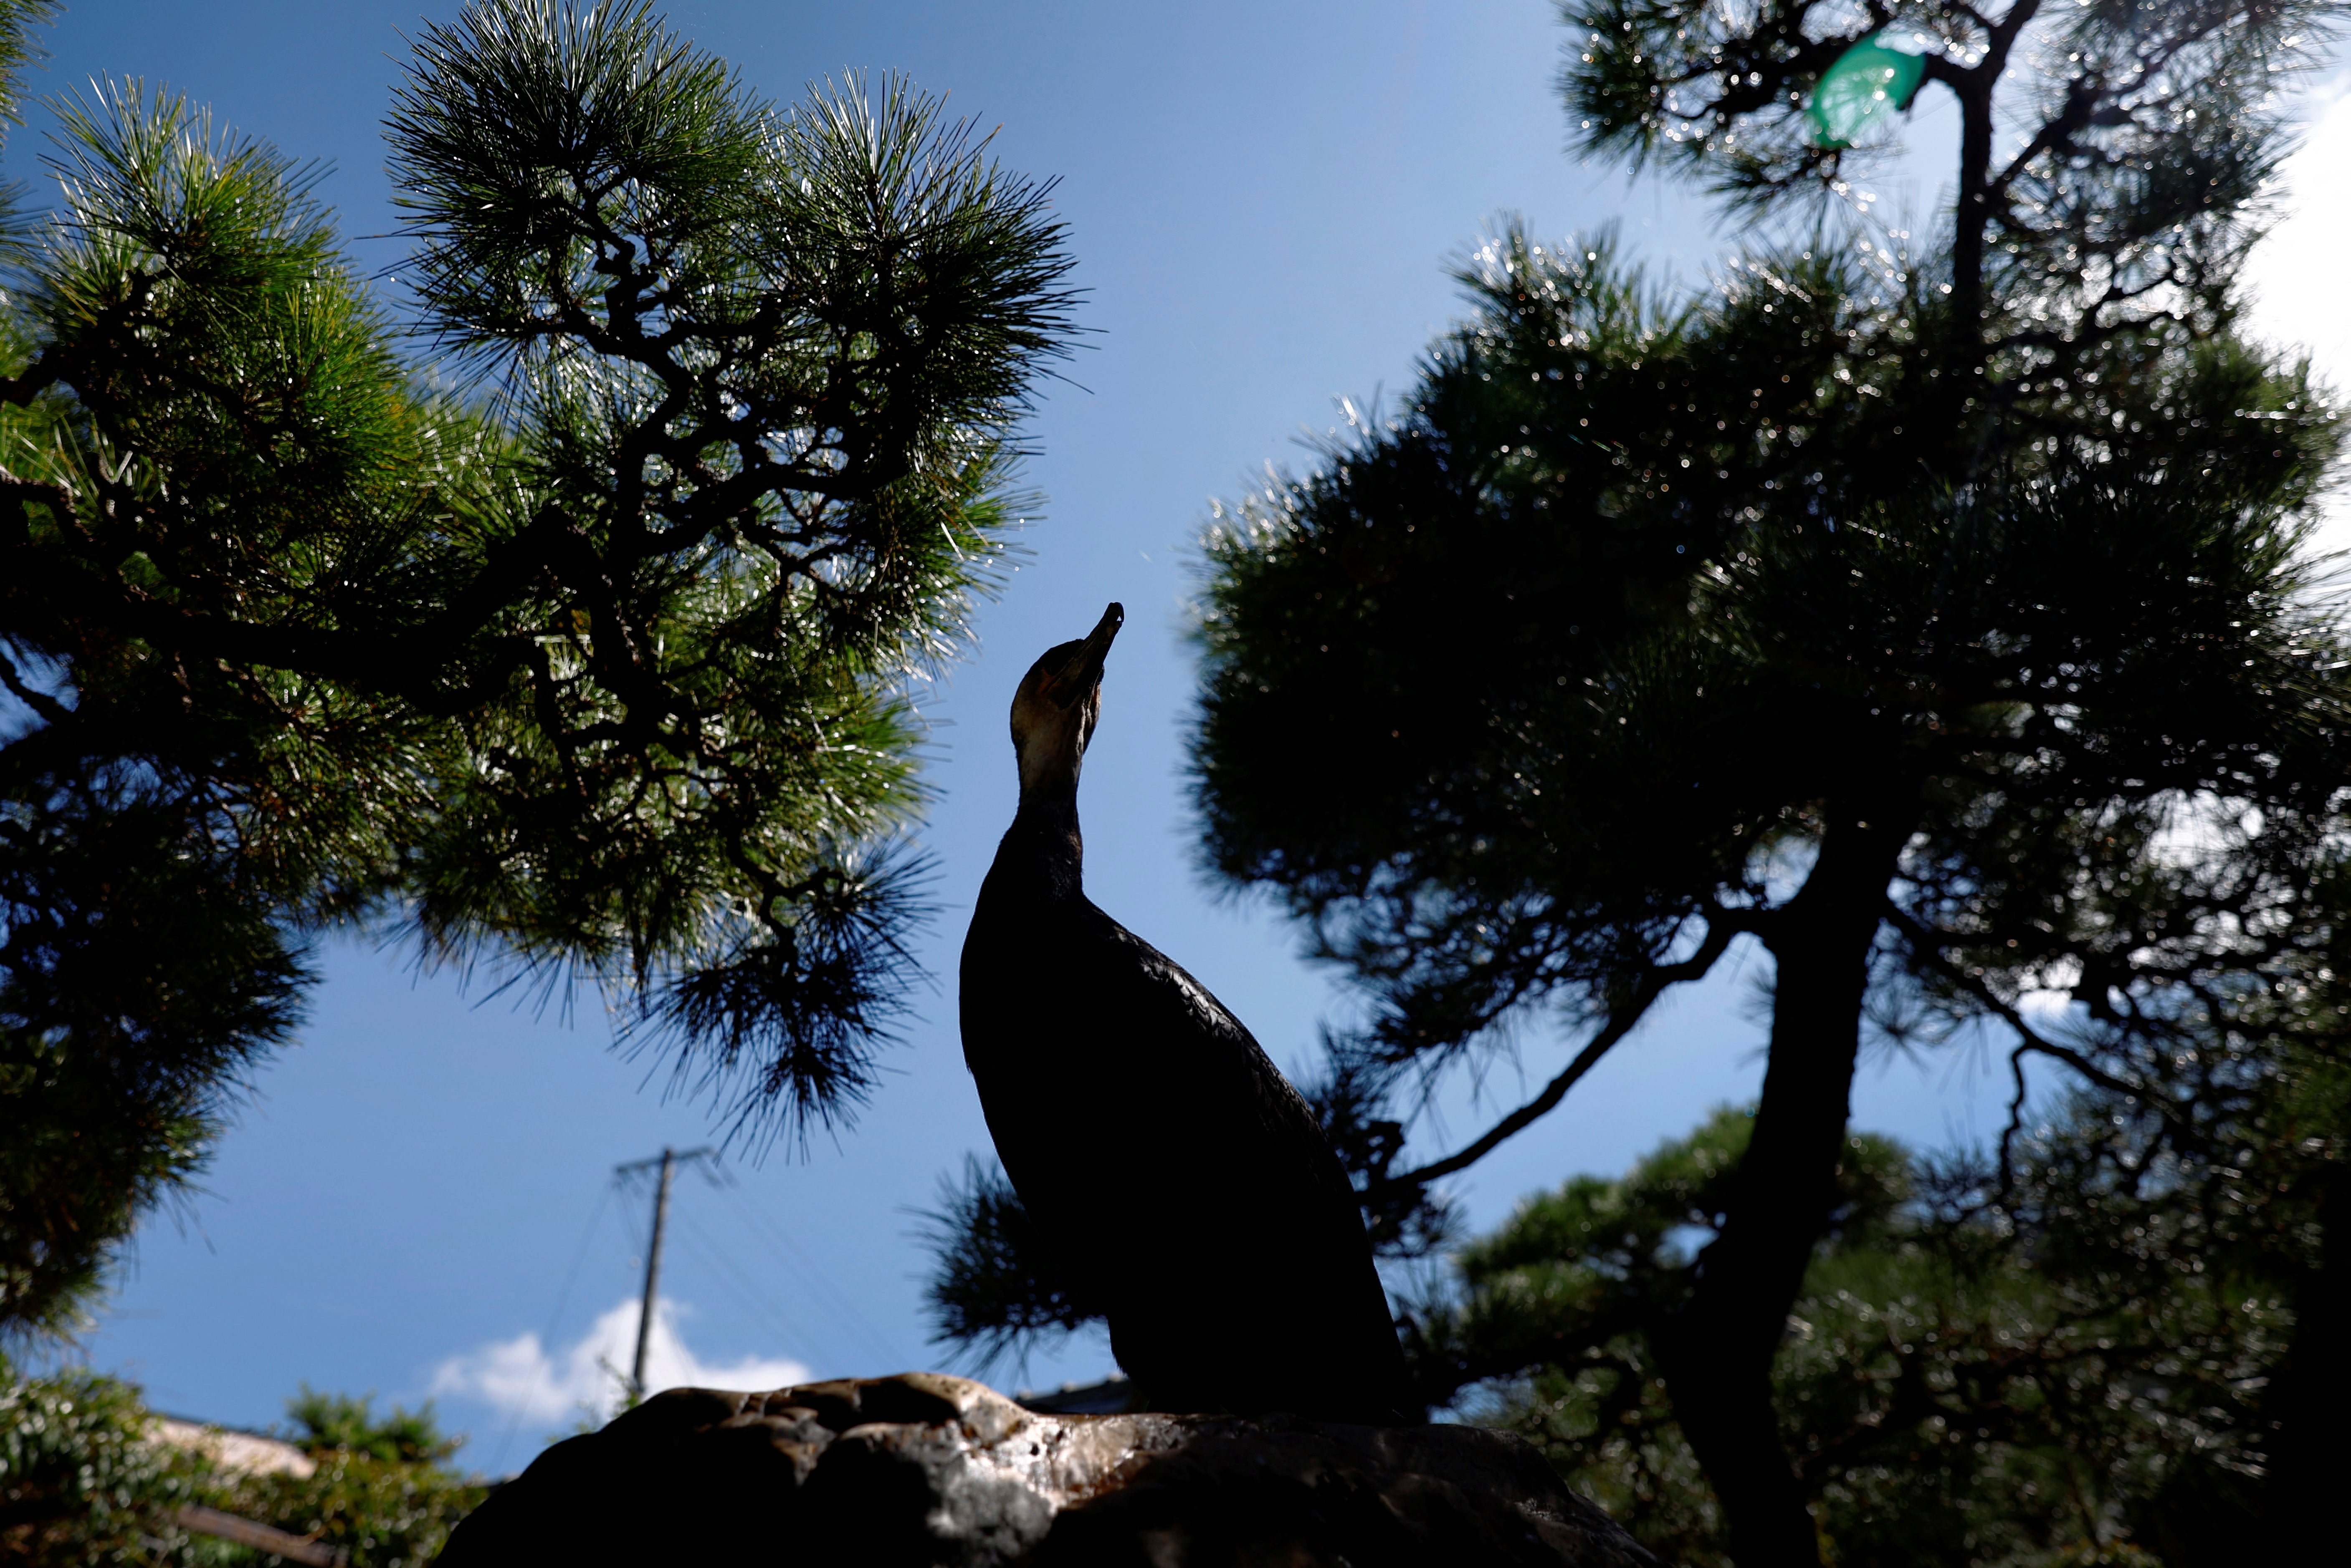 A cormorant belonging to Youichiro Adachi, rests in a garden at his house